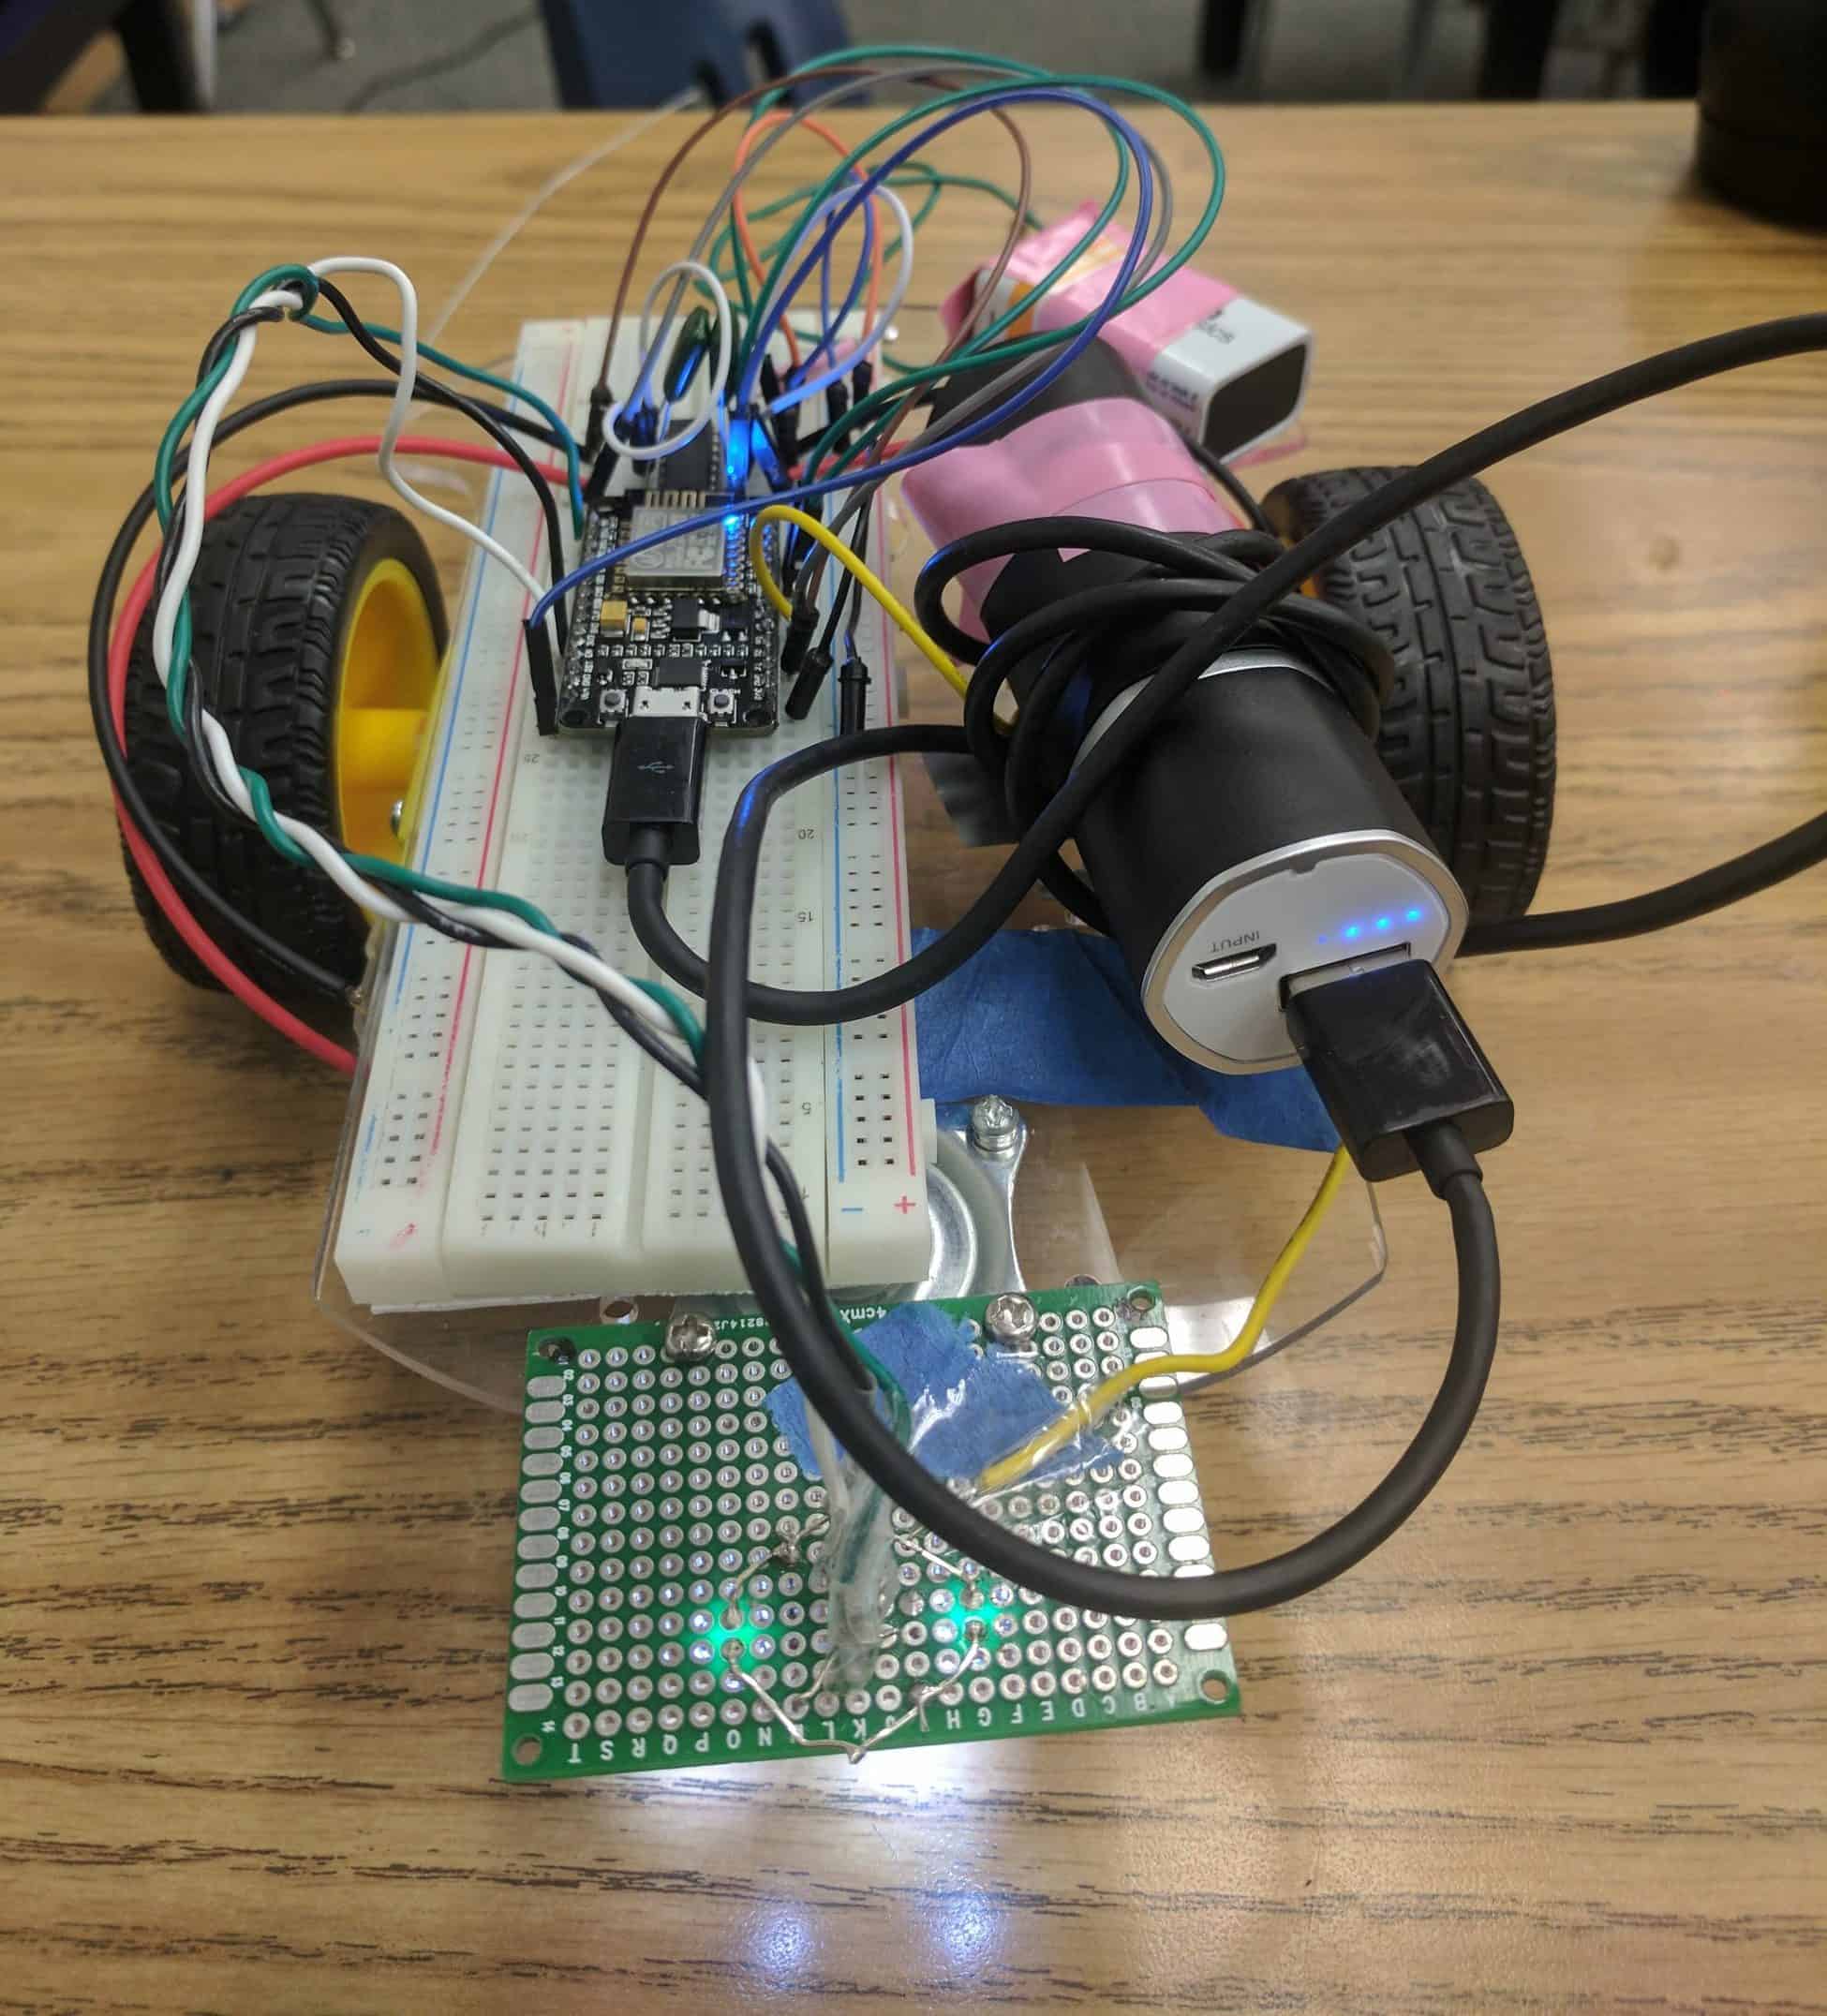 Finished DIY voice-controlled robot with edge sensor